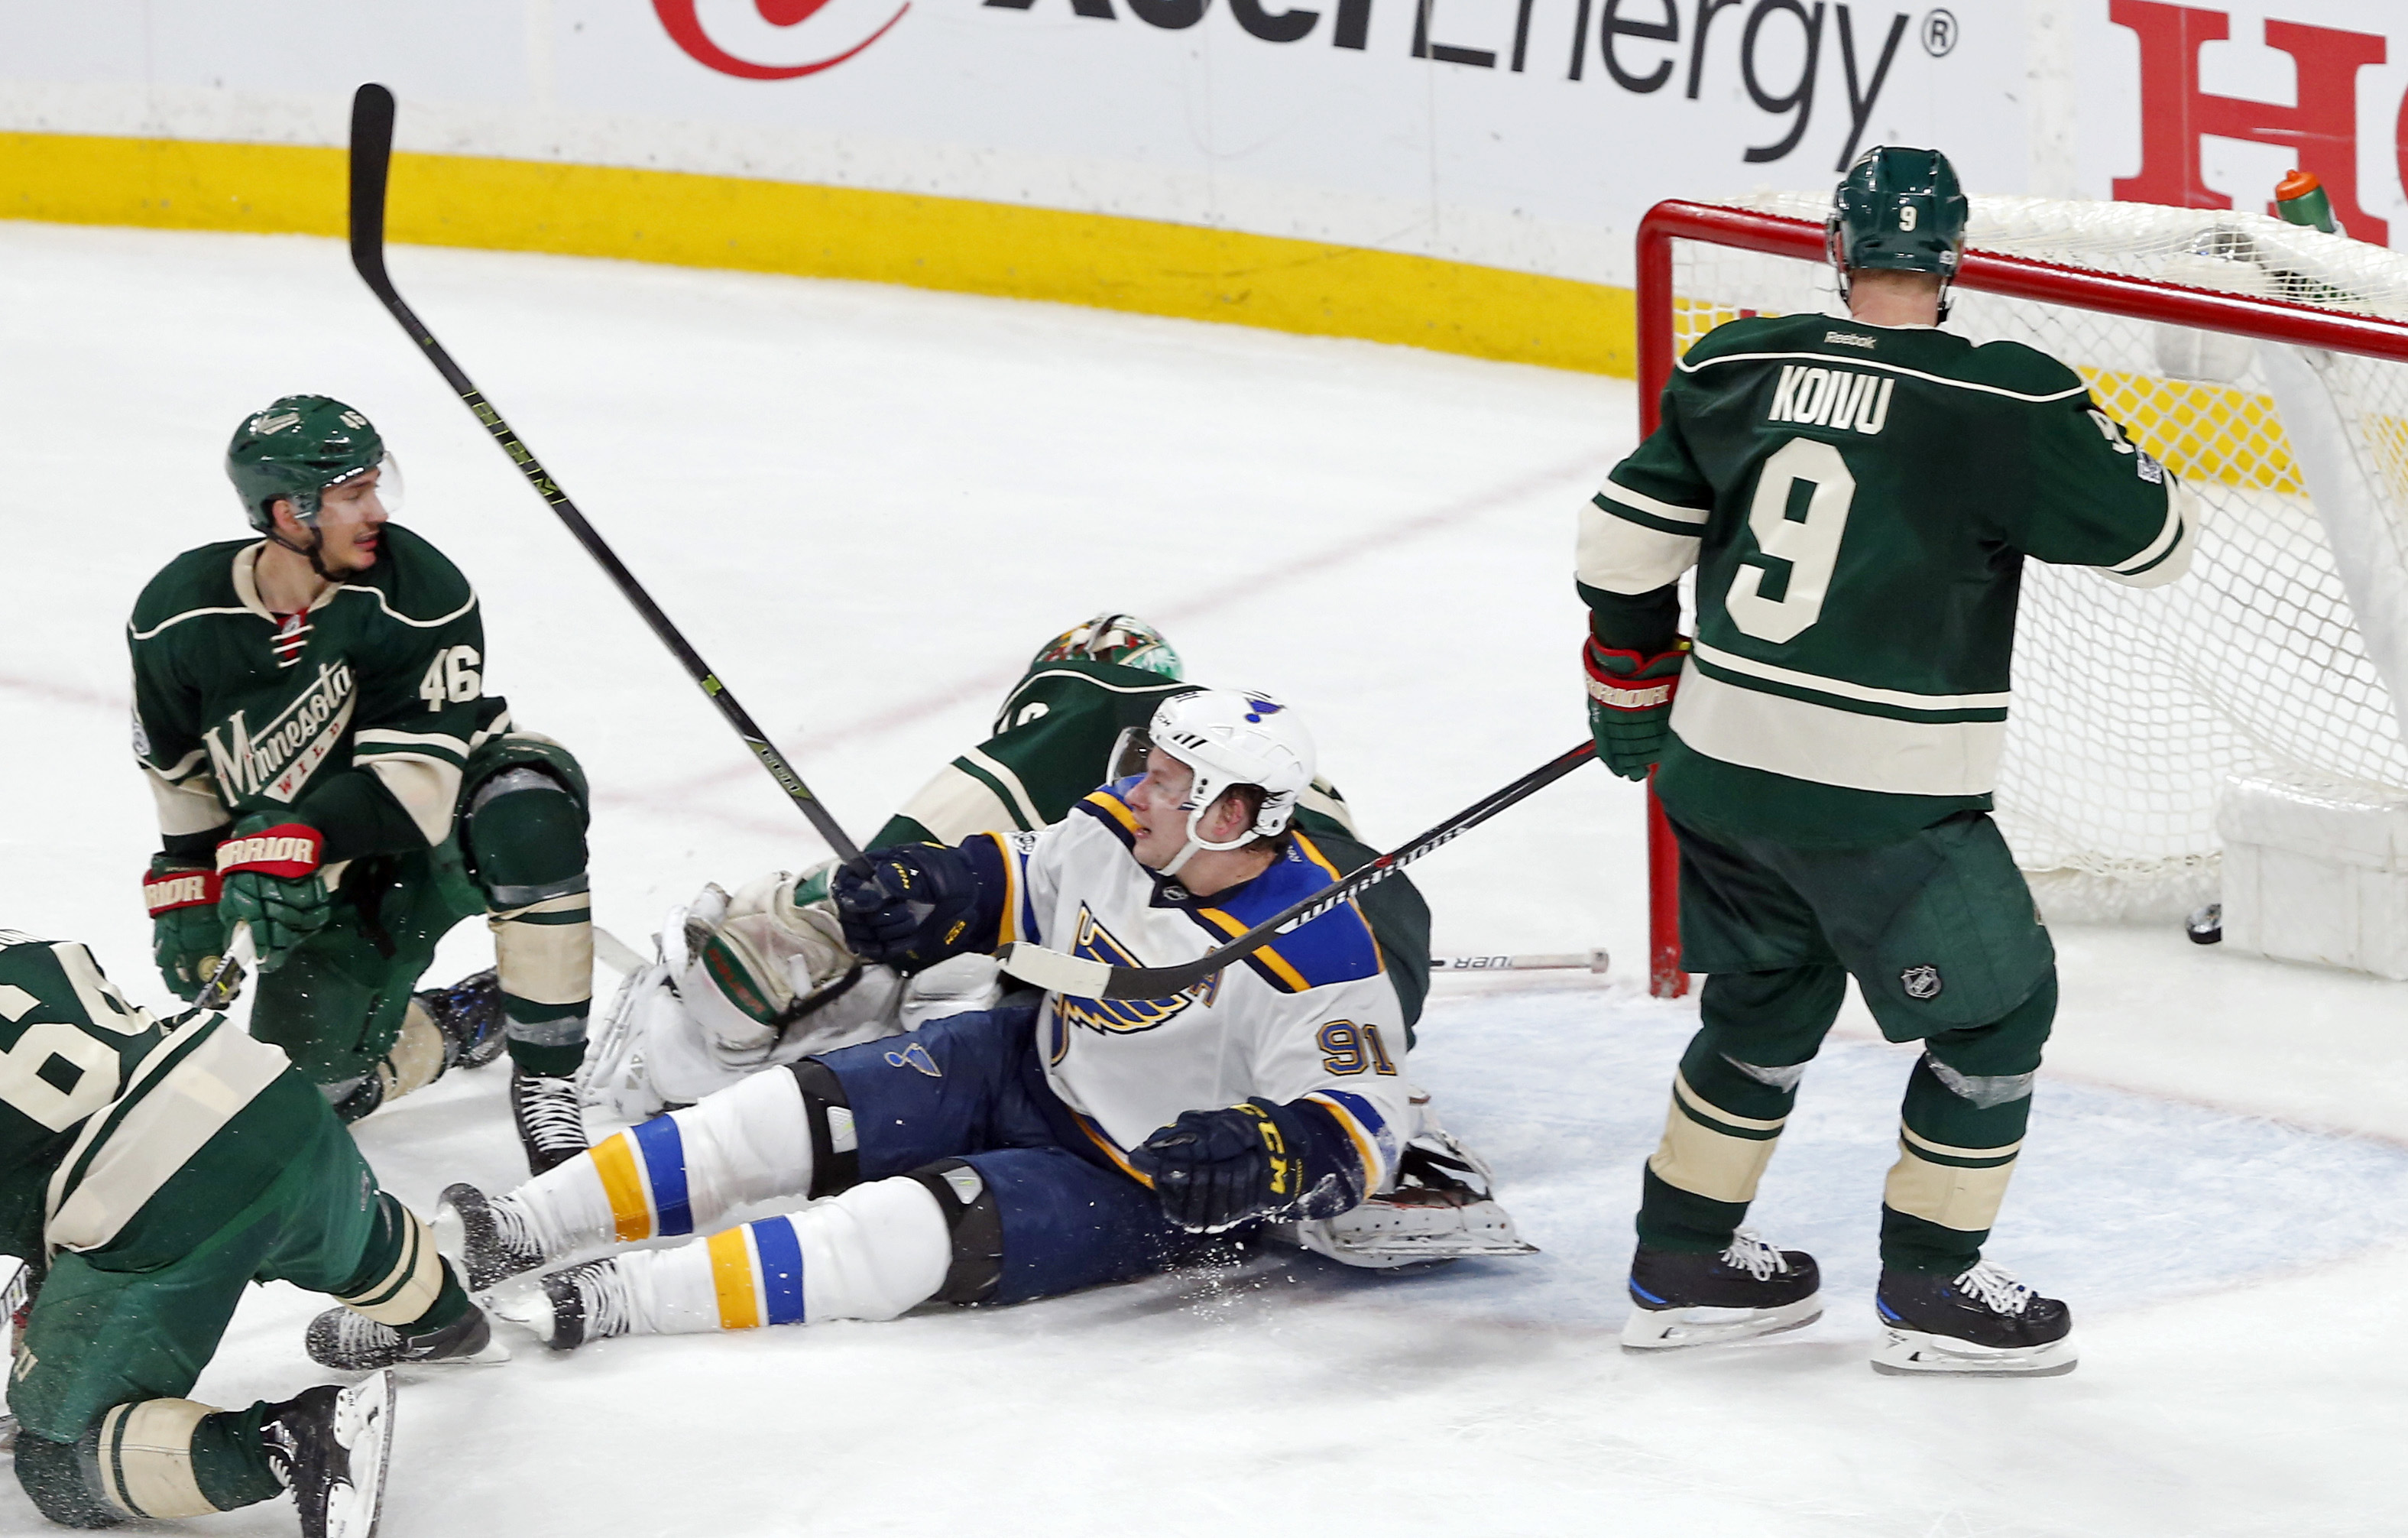 Four Minnesota Wild players couldn't overcome the Minnesota tax system, which scored the winning goal in the first game of their playoffs series earlier this month. (AP Photo/Jim Mone)